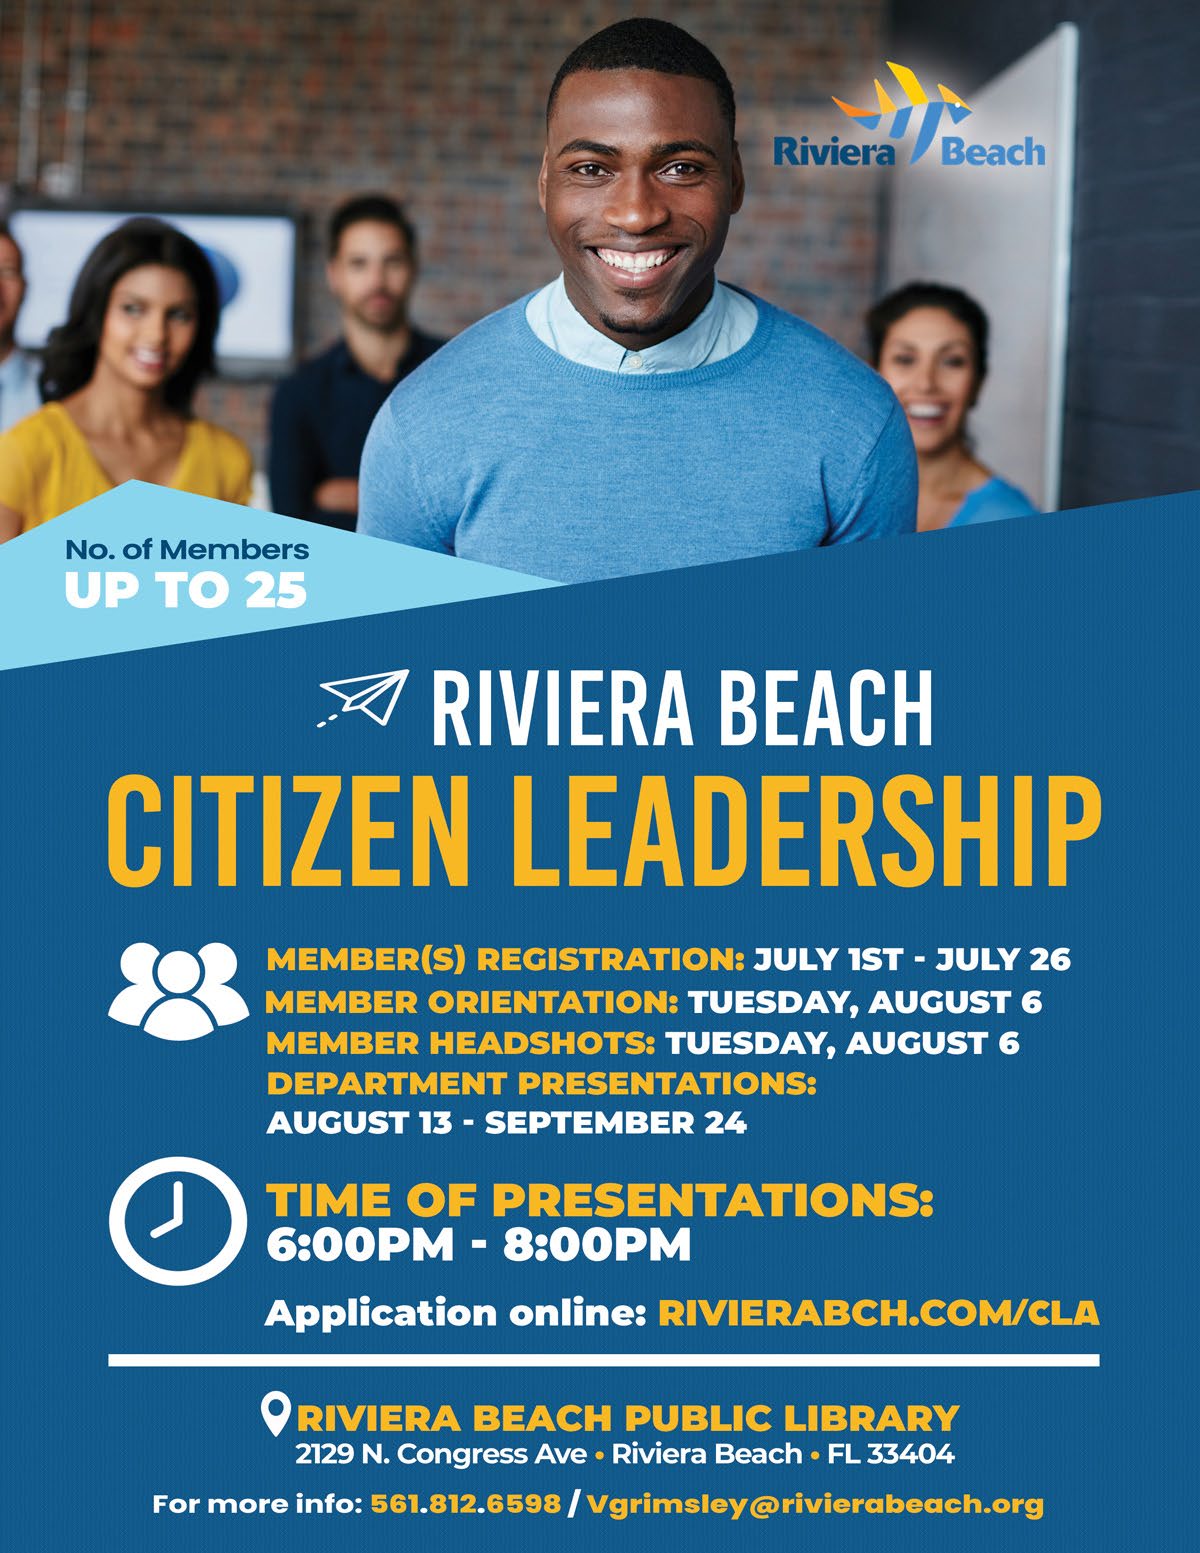 RIVIERA BEACH CITIZEN LEADERSHIP MEMBERS) REGISTRATION: JULY 1ST - JULY 26 MEMBER ORIENTATION: TUESDAY, AUGUST 6 MEMBER HEADSHOTS: TUESDAY, AUGUST 6 DEPARTMENT PRESENTATIONS: AUGUST 13 - SEPTEMBER 24 TIME OF PRESENTATIONS: 6:00PM - 8:00PM Application online: RIVIERABCH.COM/CLA RIVIERA BEACH PUBLIC LIBRARY 2129 N. Congress Ave • Riviera Beach • FL 33404 For more info: 561.812.6598 / Vgrimsley@rivierabeach.org